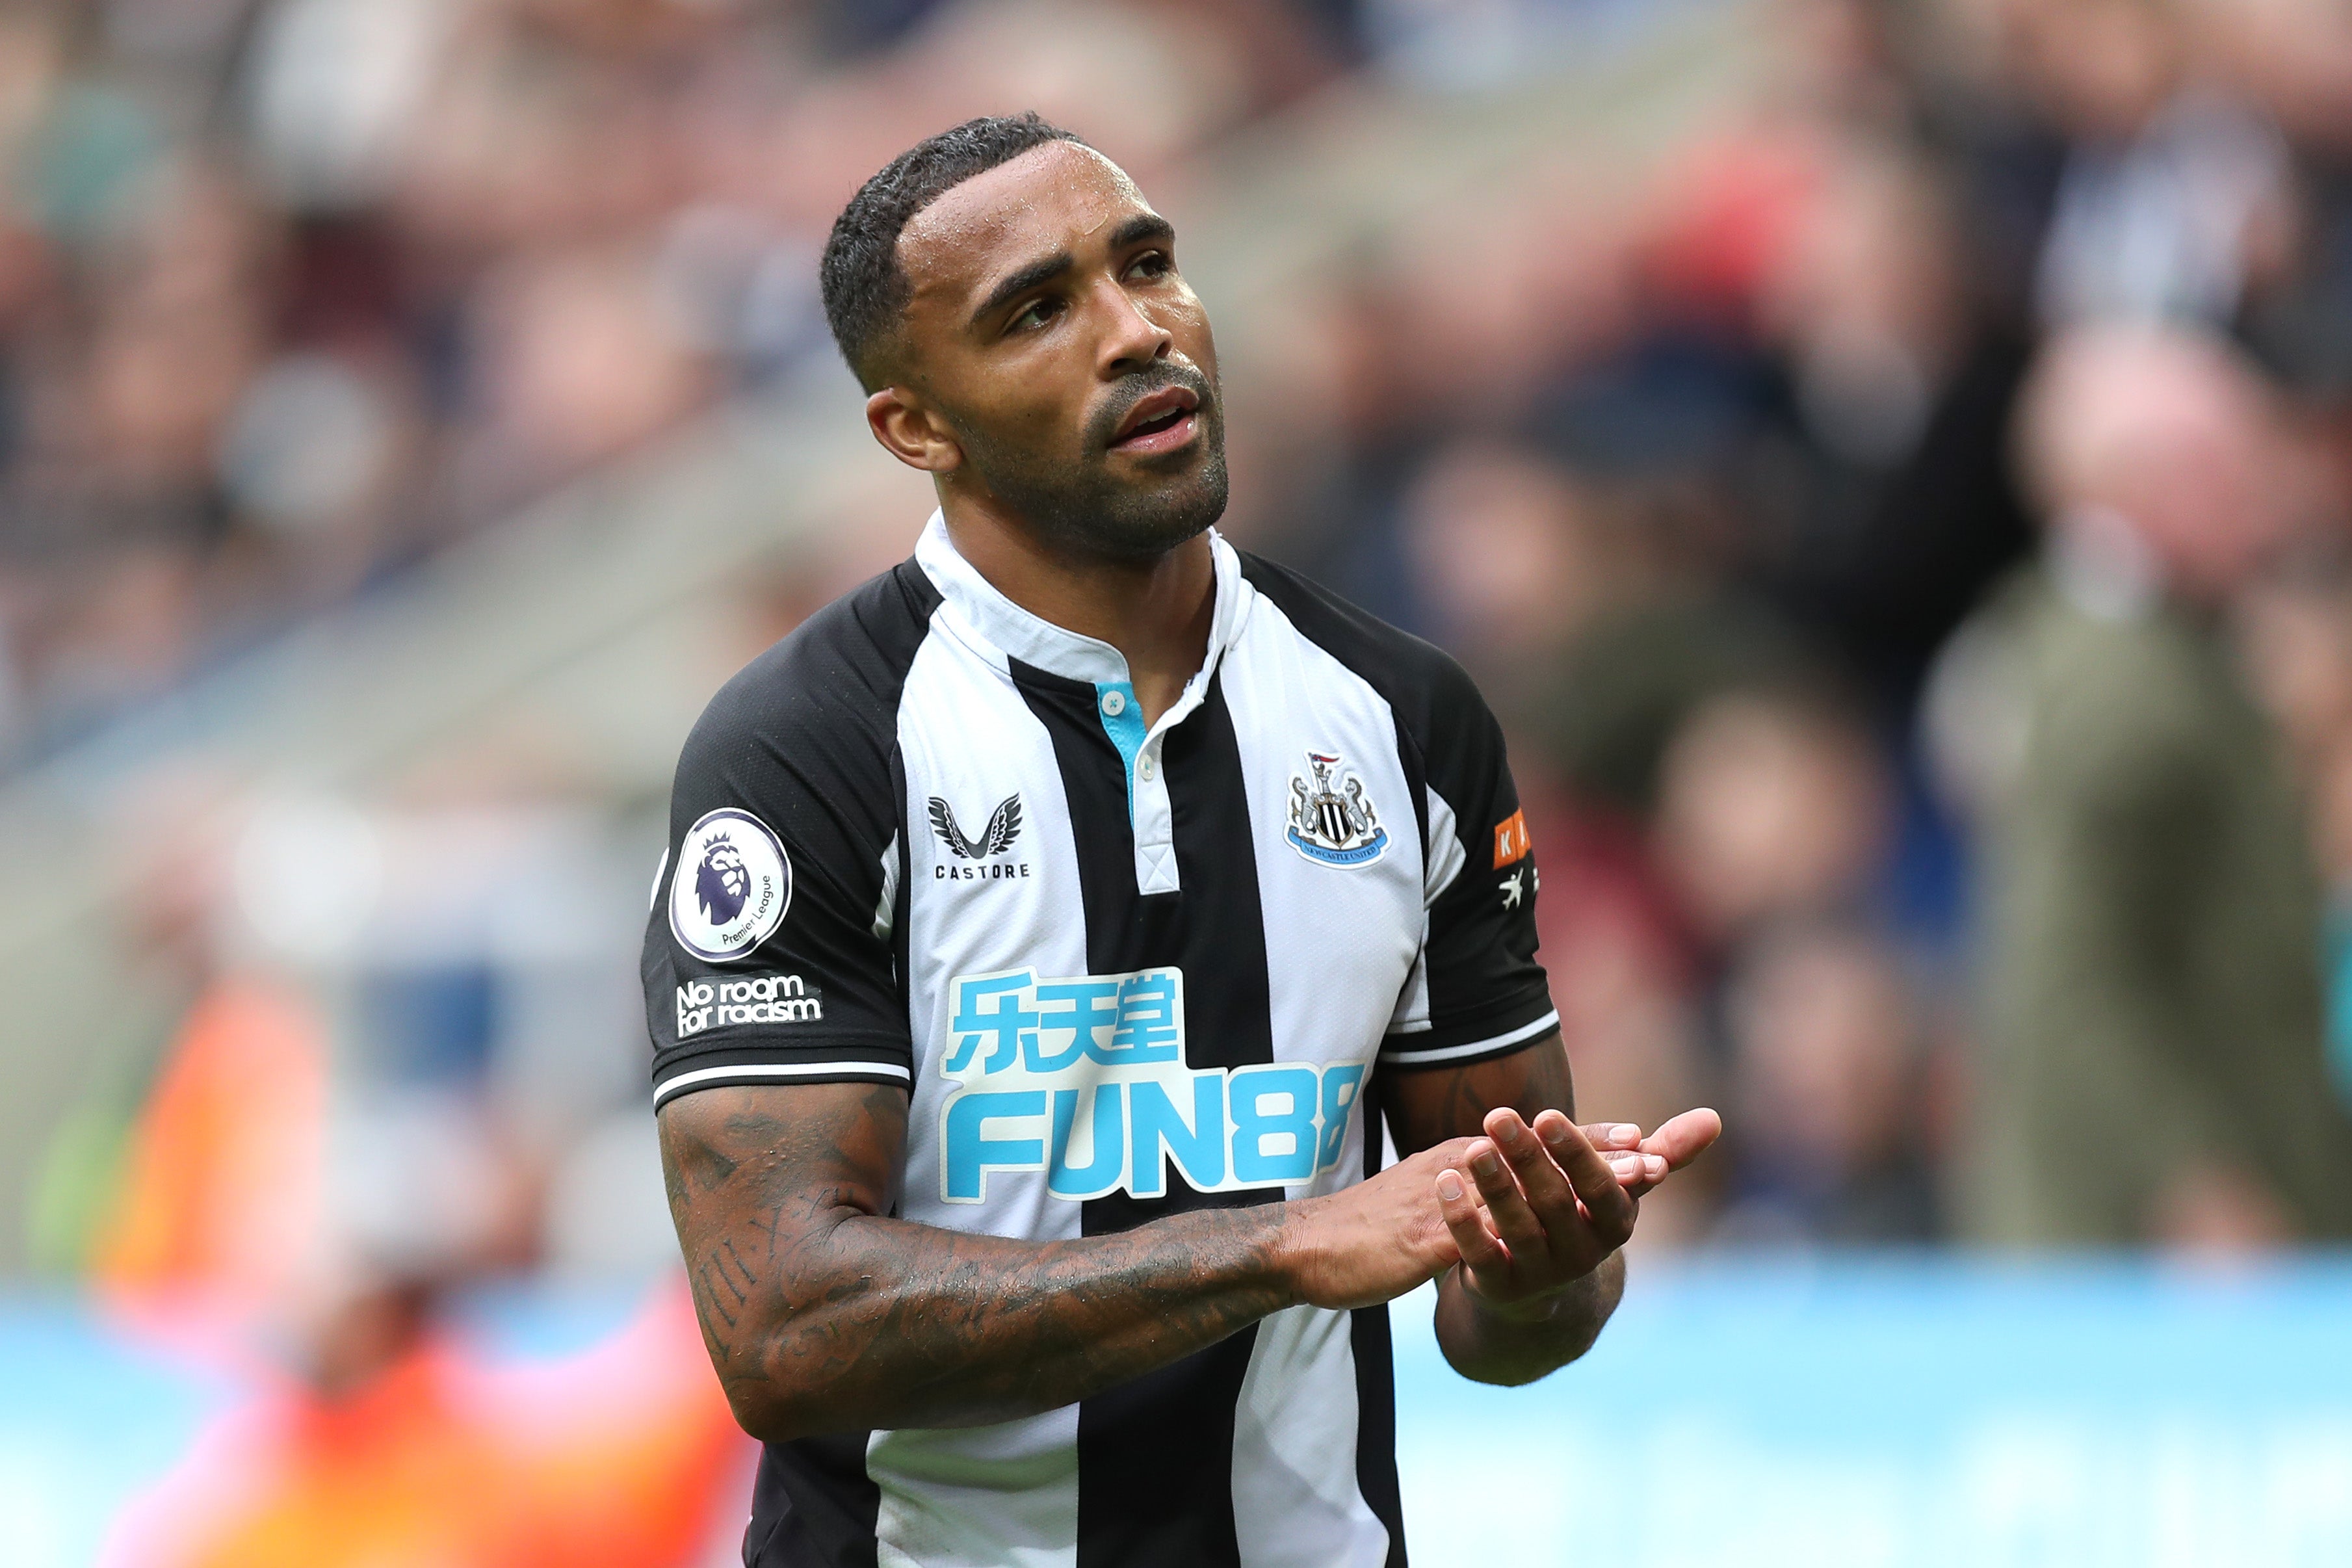 Callum Wilson is unavailable as Newcastle aim to secure their first win of the season